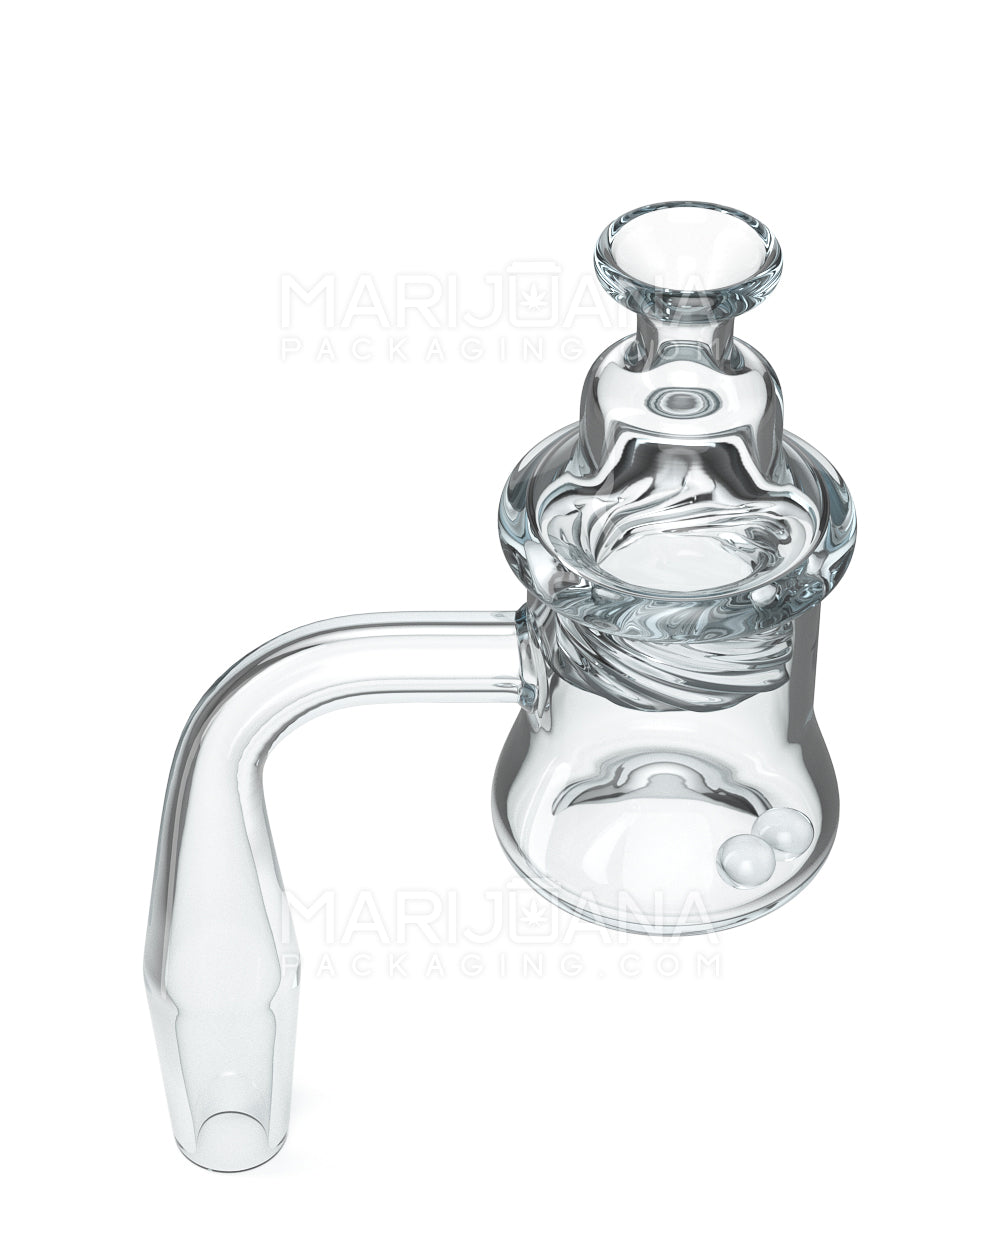 Thick 4mm Quartz Banger Kit w/ Bell Spinner Carb Cap & 2 Pearls | 14mm - 90 Degree - Male - 2